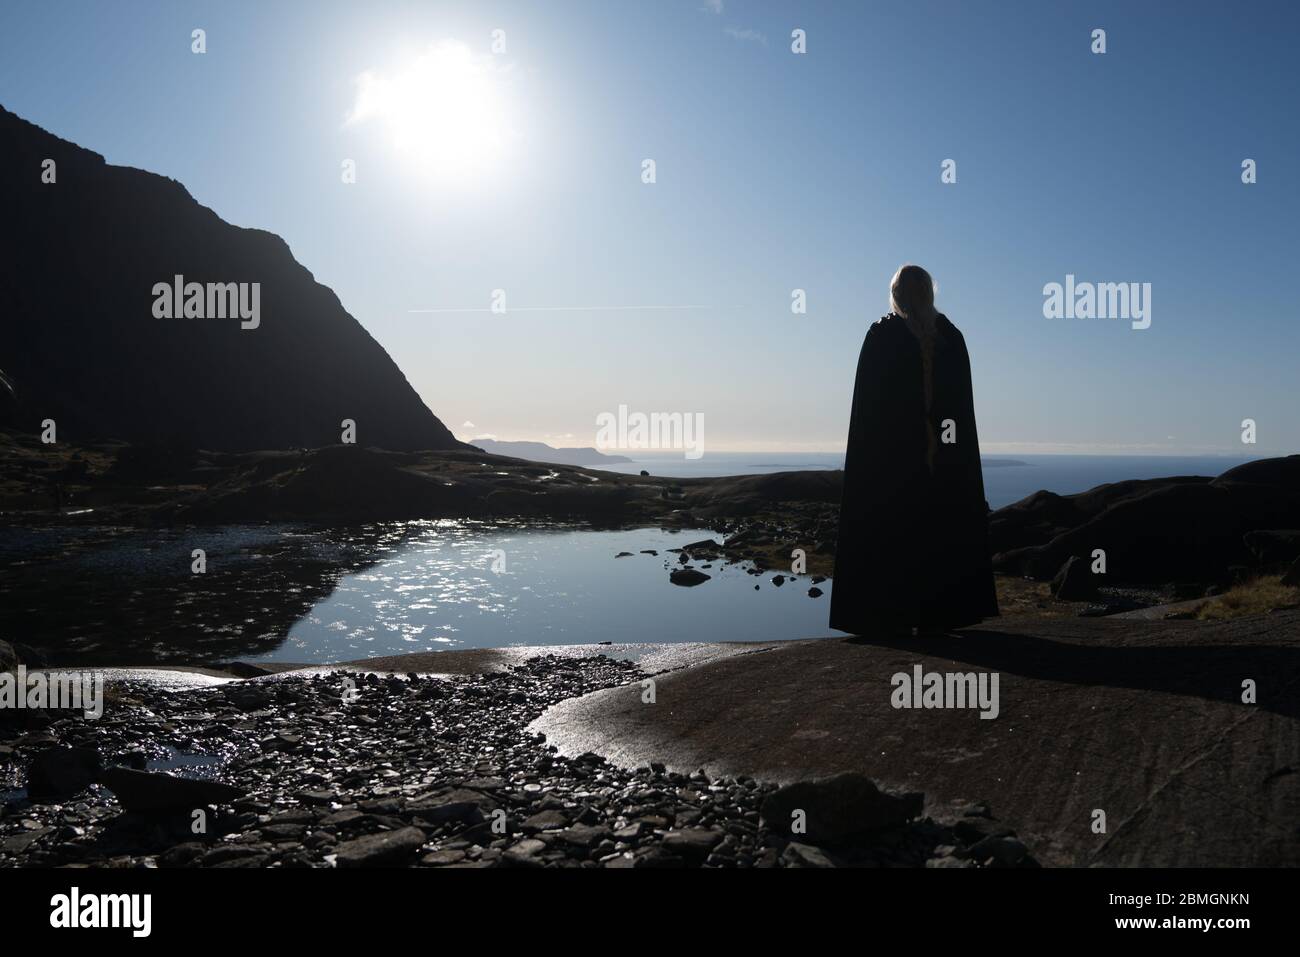 A cloaked figure, lost in contemplation beside a mountain loch, with a view out to sea Stock Photo